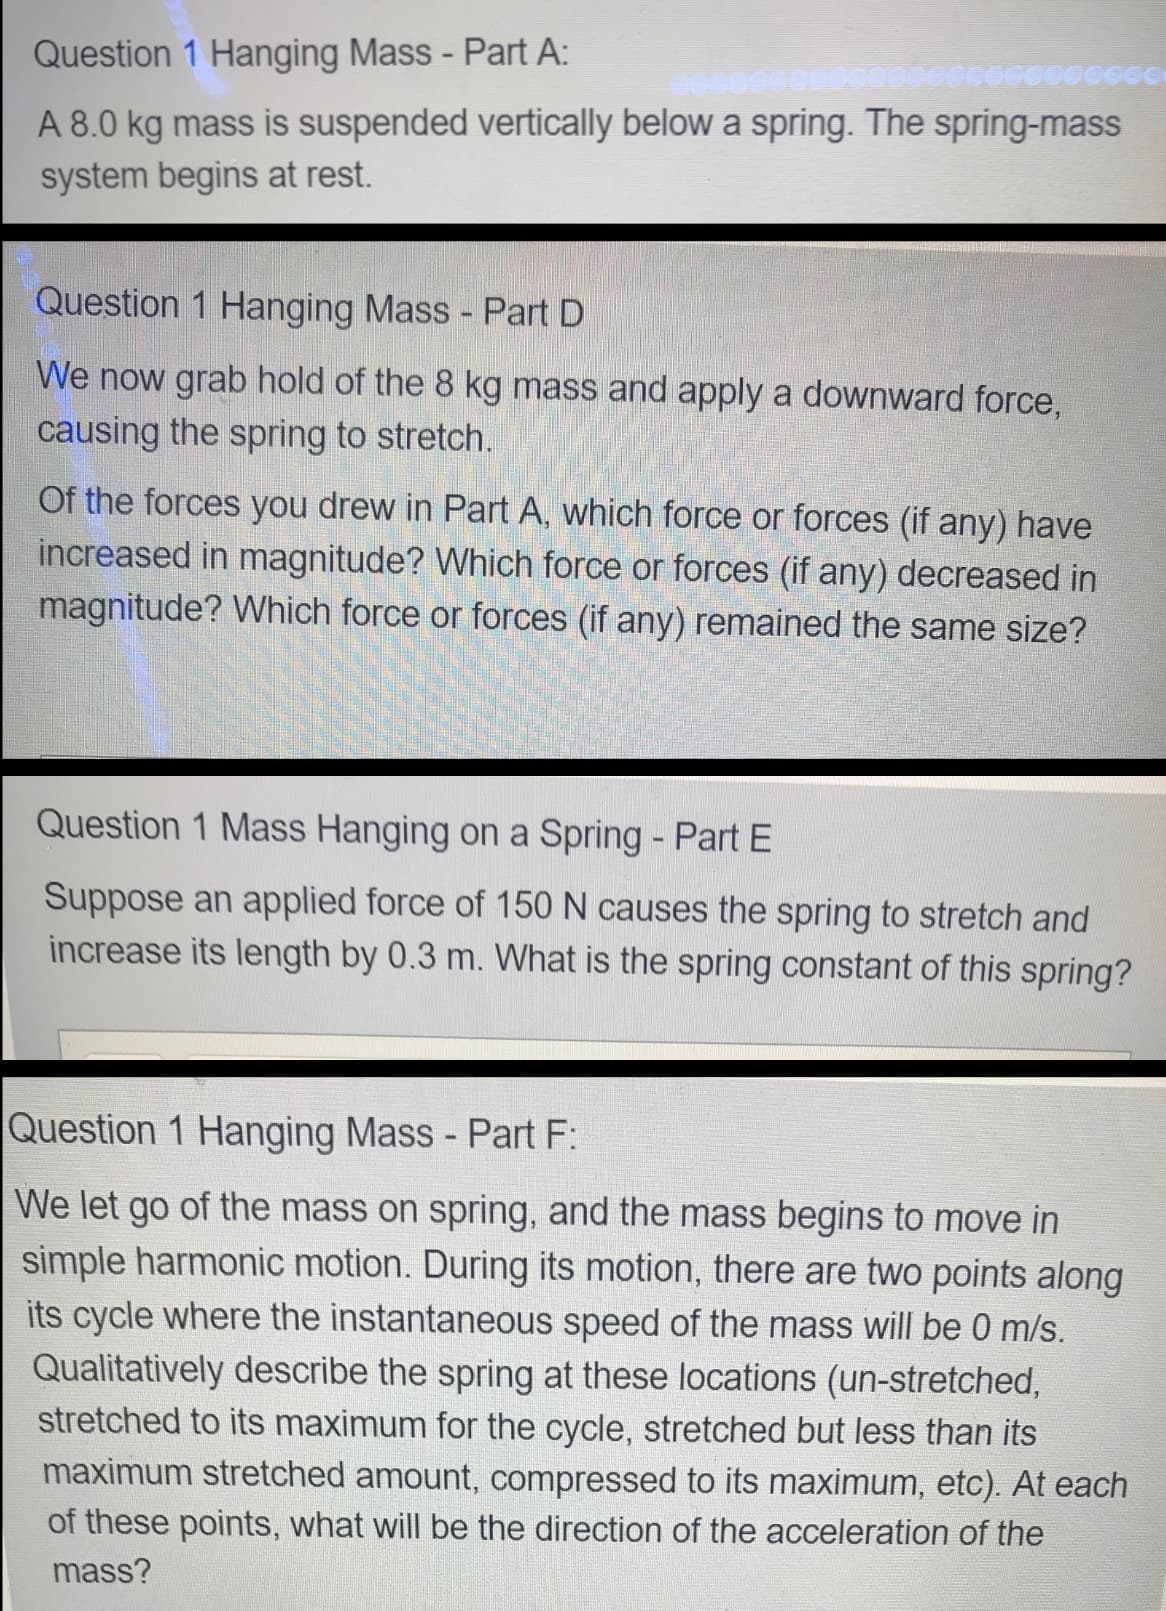 Question 1 Hanging Mass - Part A:
A 8.0 kg mass is suspended vertically below a spring. The spring-mass
system begins at rest.
Question 1 Hanging Mass - Part D
We now grab hold of the 8 kg mass and apply a downward force,
causing the spring to stretch.
Of the forces you drew in Part A, which force or forces (if any) have
increased in magnitude? Which force or forces (if any) decreased in
magnitude? Which force or forces (if any) remained the same size?
Question 1 Mass Hanging on a Spring - Part E
Suppose an applied force of 150 N causes the spring to stretch and
increase its length by 0.3 m. What is the spring constant of this spring?
Question 1 Hanging Mass - Part F:
|We let go of the mass on spring, and the mass begins to move in
simple harmonic motion. During its motion, there are two points along
its cycle where the instantaneous speed of the mass will be 0 m/s.
Qualitatively describe the spring at these locations (un-stretched,
stretched to its maximum for the cycle, stretched but less than its
maximum stretched amount, compressed to its maximum, etc). At each
of these points, what will be the direction of the acceleration of the
mass?
